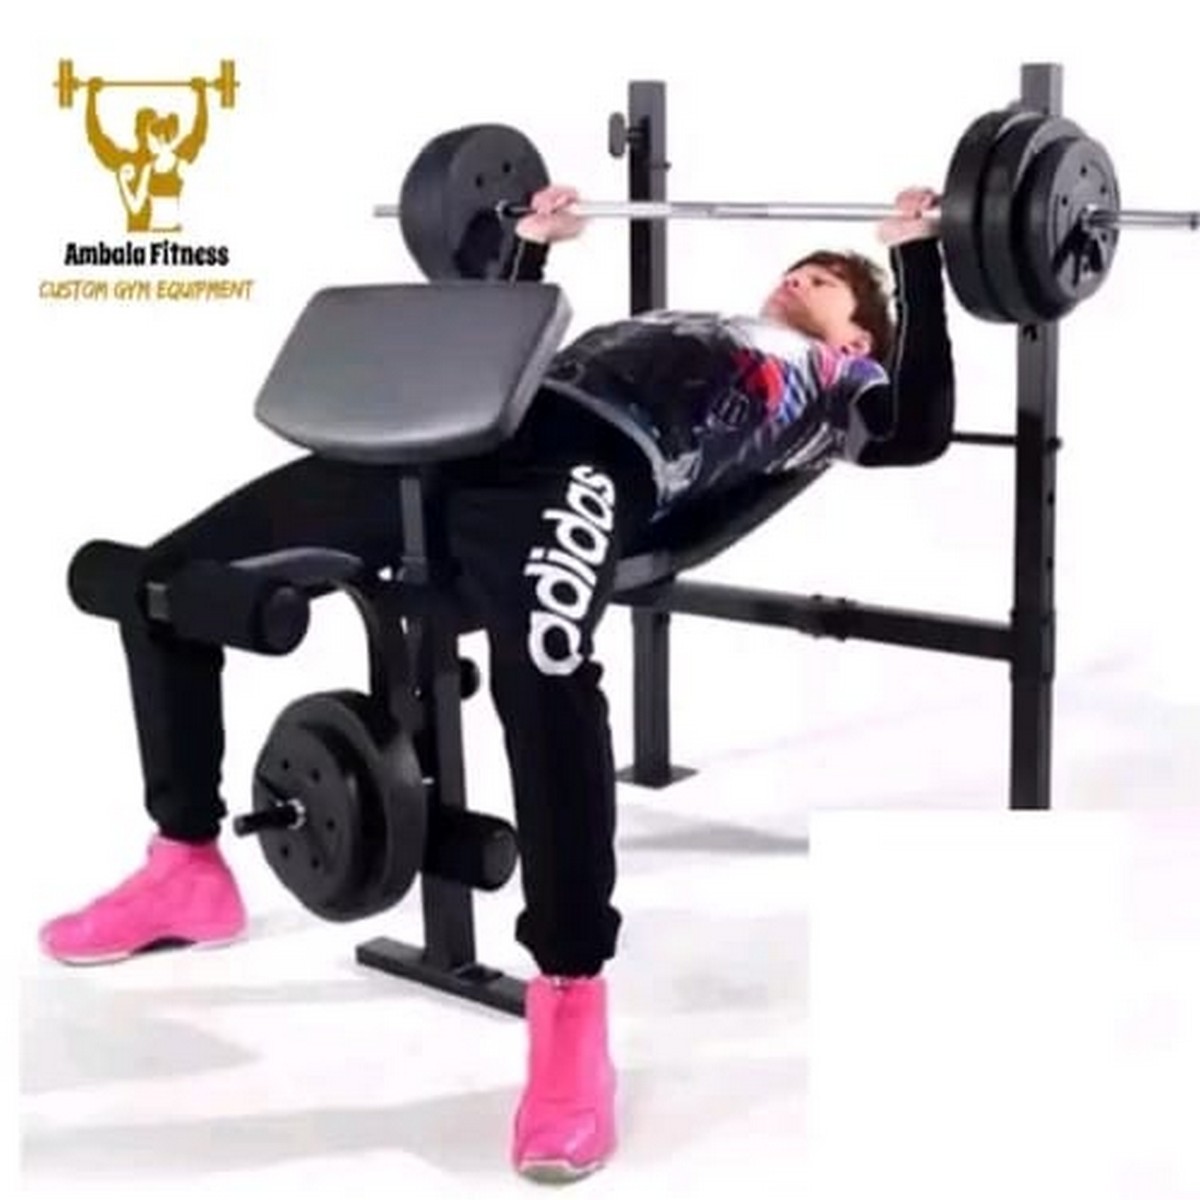 BEST Quality Multi 6 Exercise Adjustable Chest Bench Press Incline